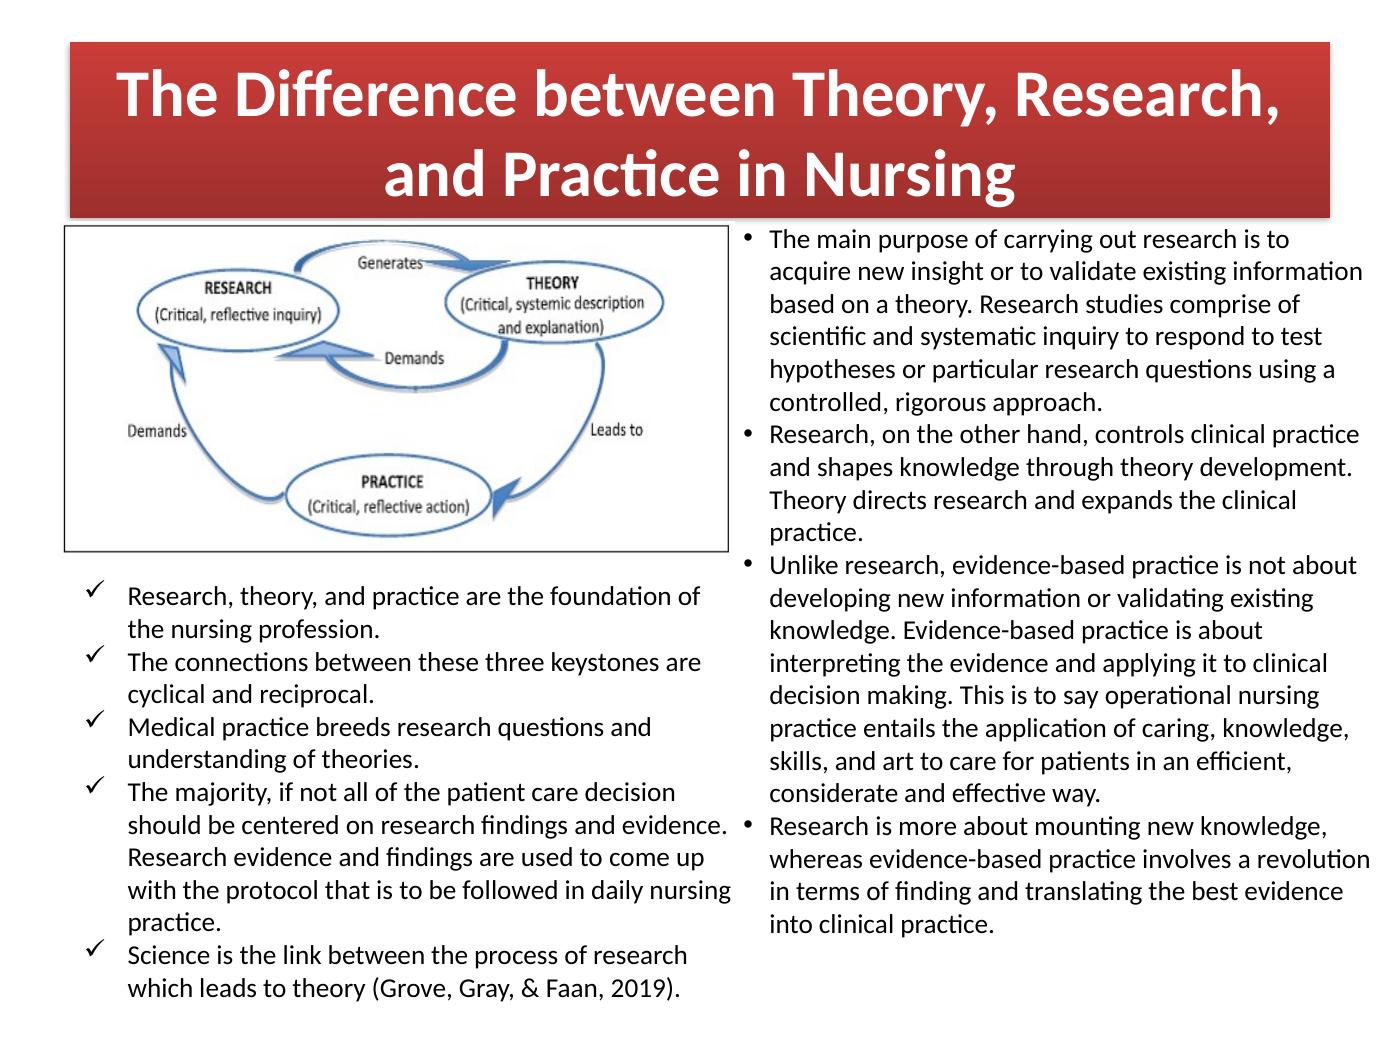 Theory, Research, and Practice in Nursing_6